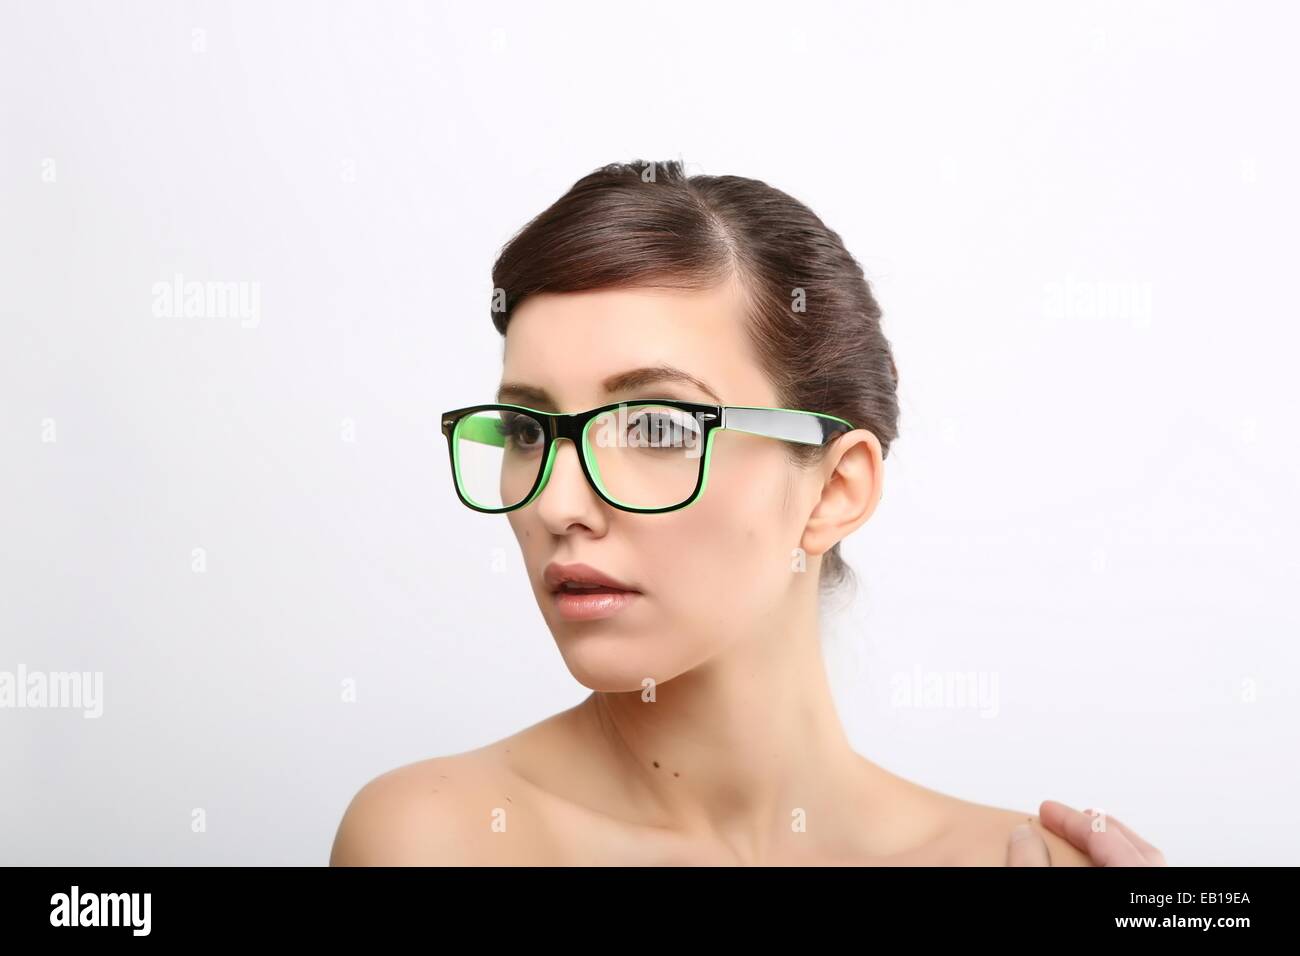 Young crazy nerd woman Stock Photo